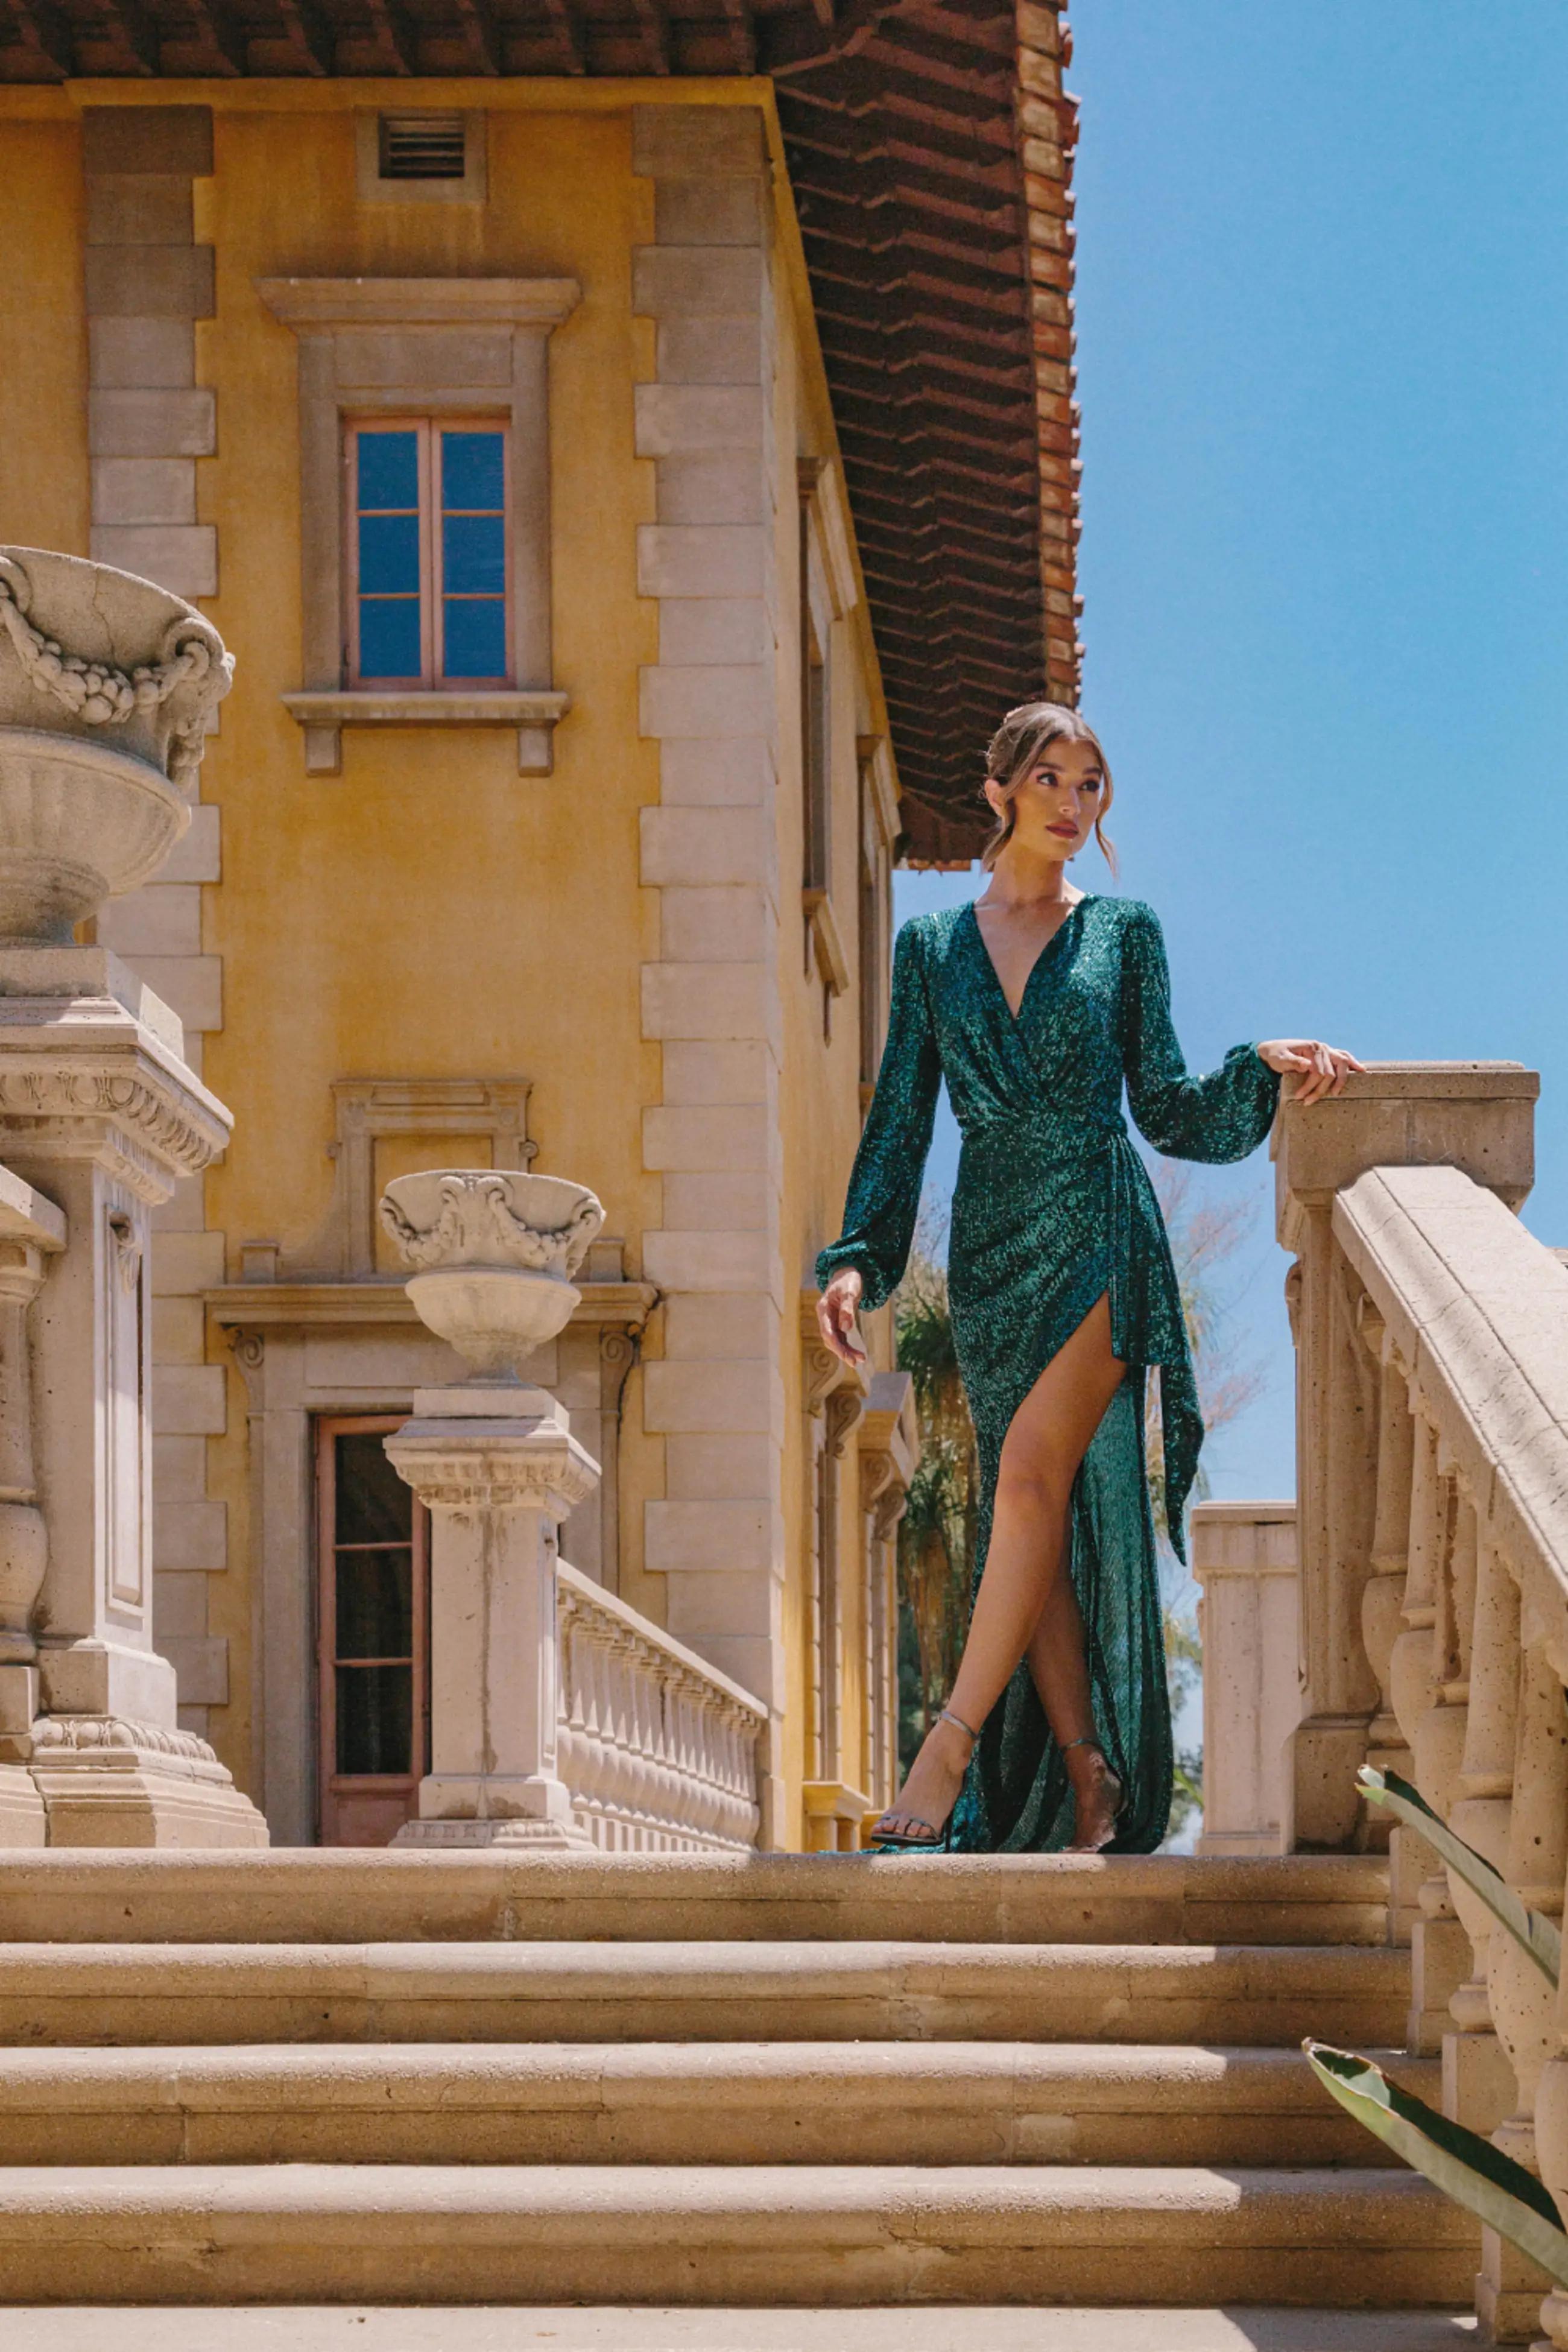 Model wearing a green evening gown near the building